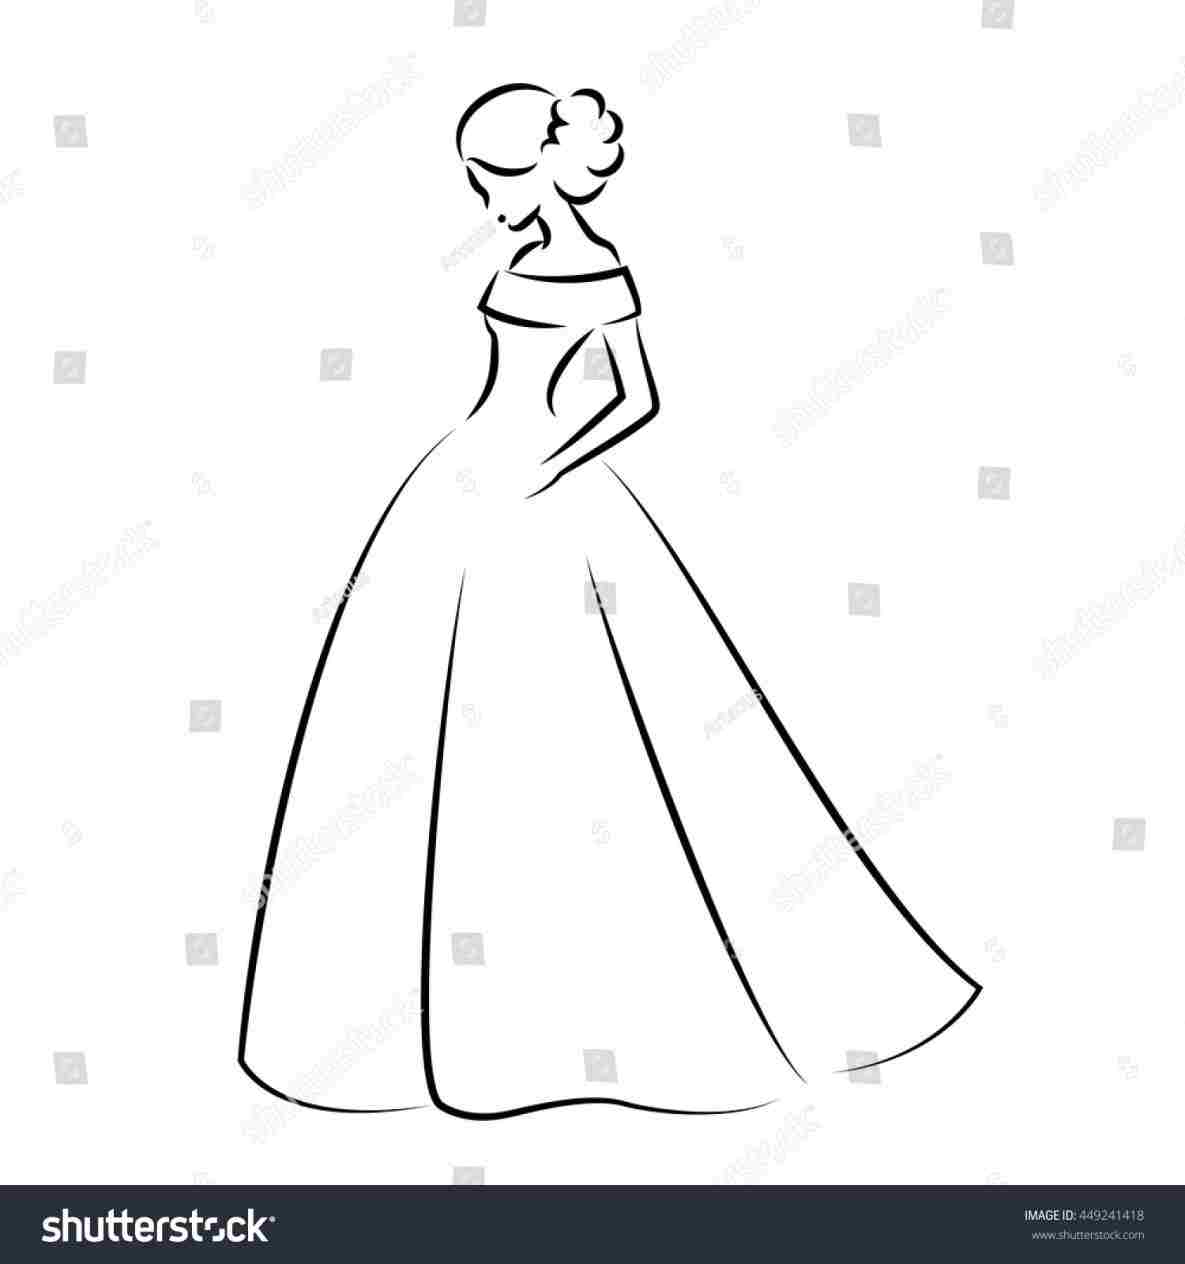 Dress Outline Sketch at PaintingValley.com | Explore collection of ...